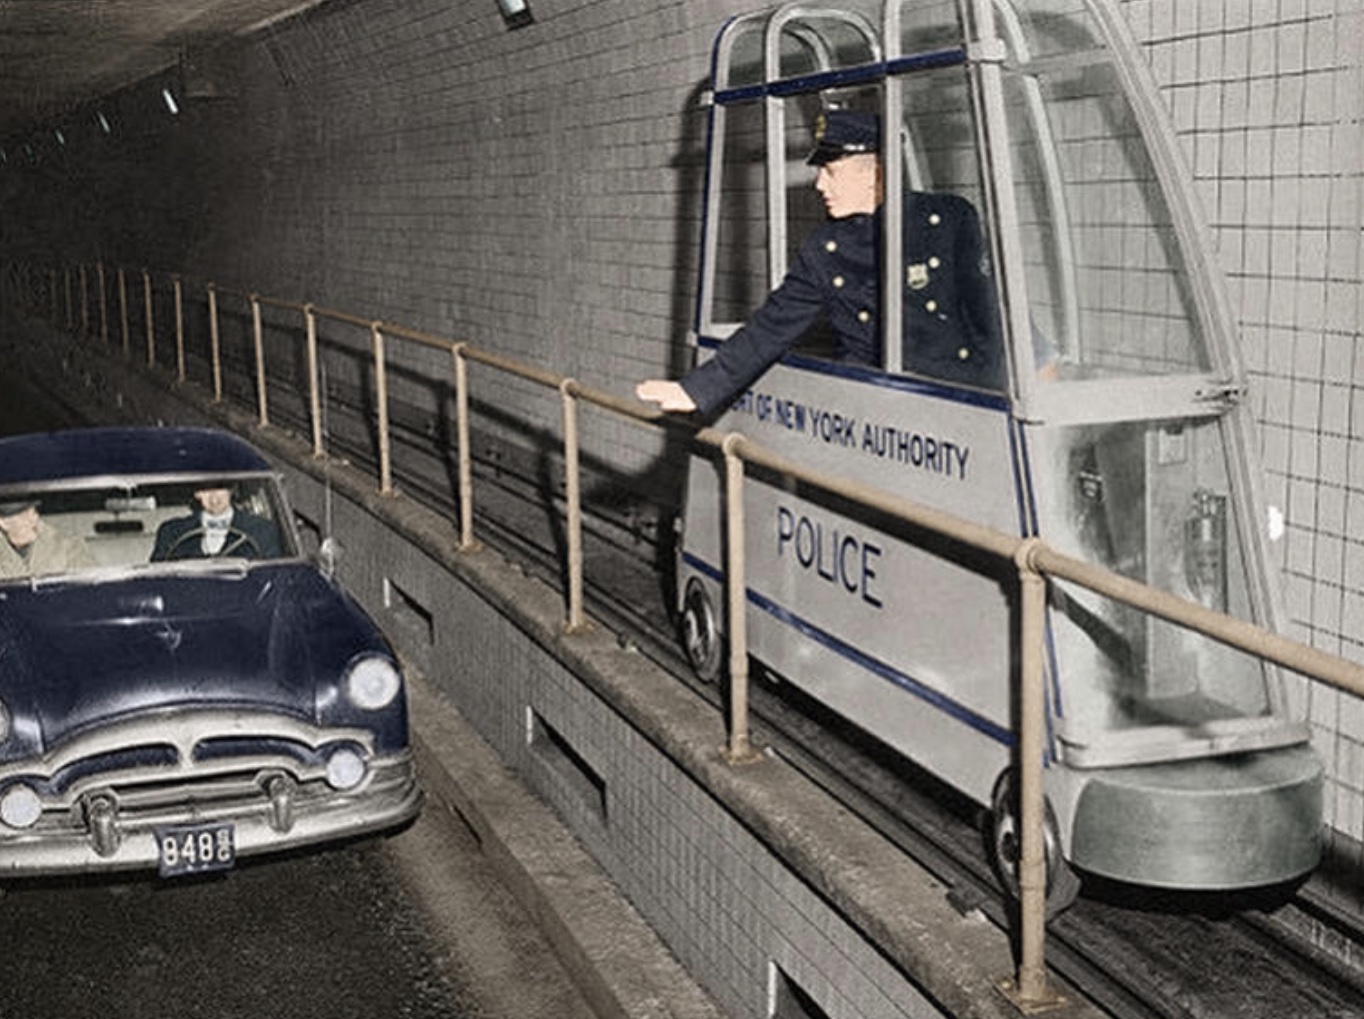 epic colorized historical photos - lincoln tunnel 1960 - 8488 Of New York Authority Police